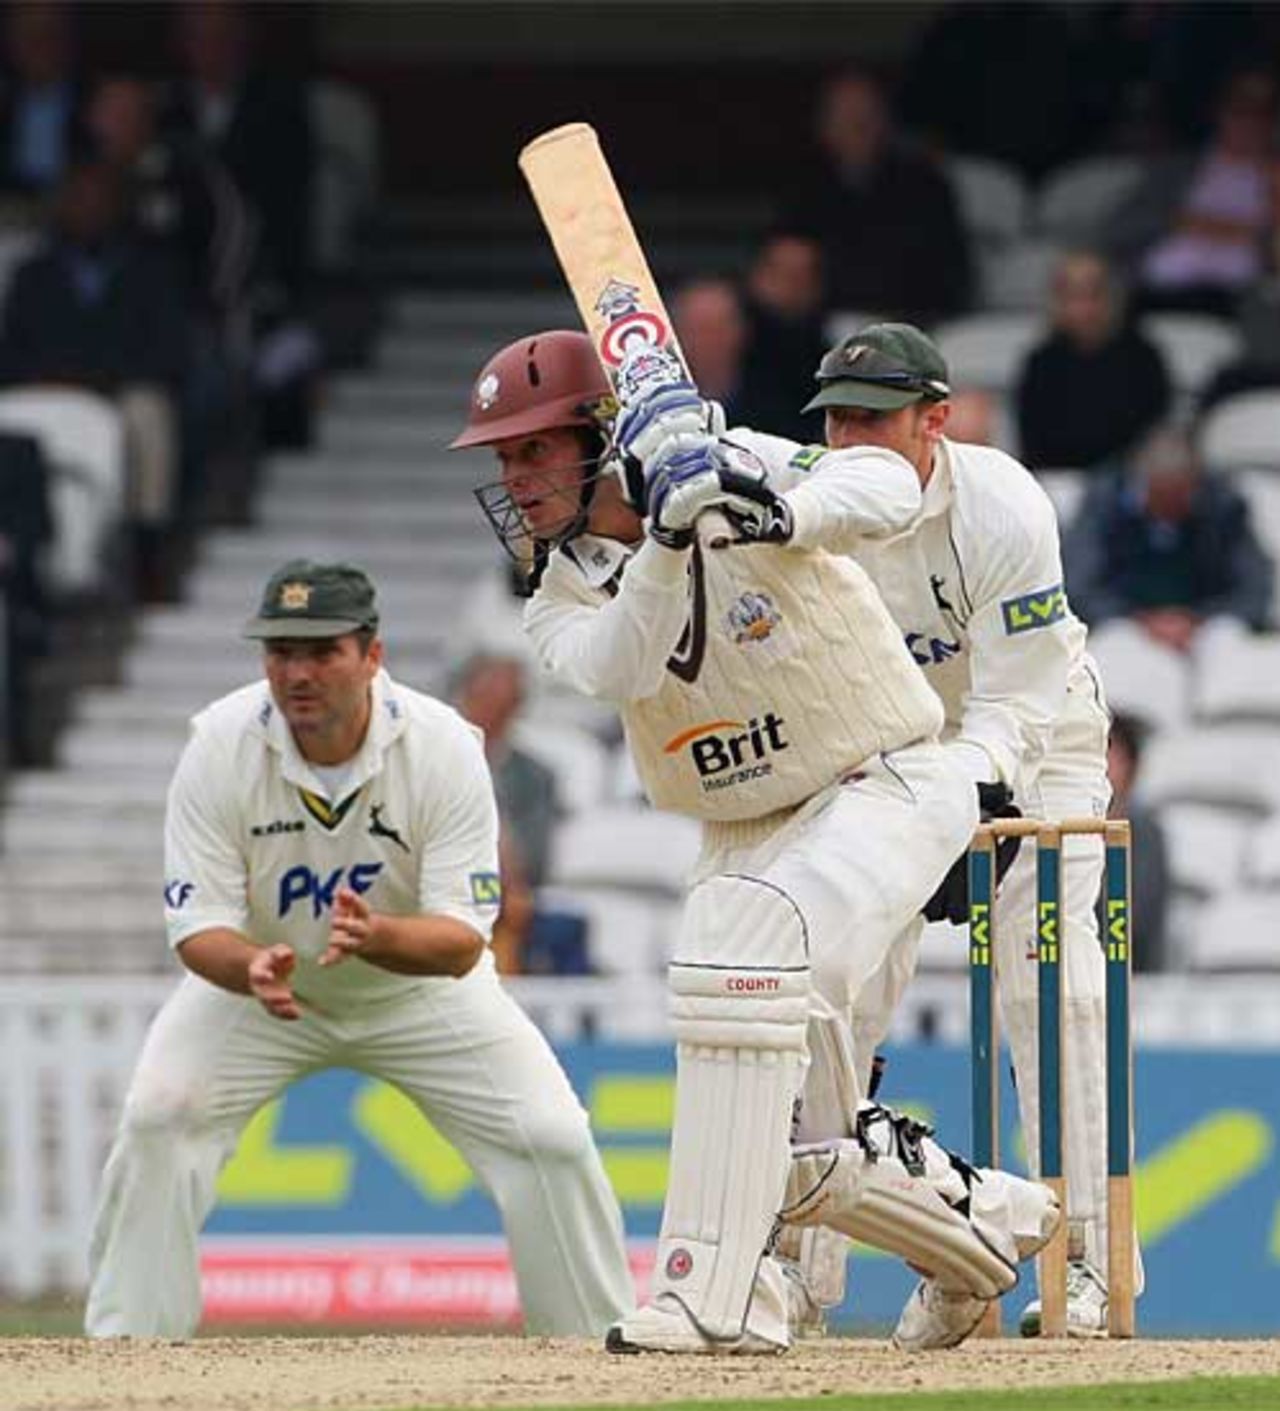 Lee Hodgson drives during his half-century on debut for Surrey, Surrey v Nottinghamshire, County Championship, The Oval, September 17, 2008